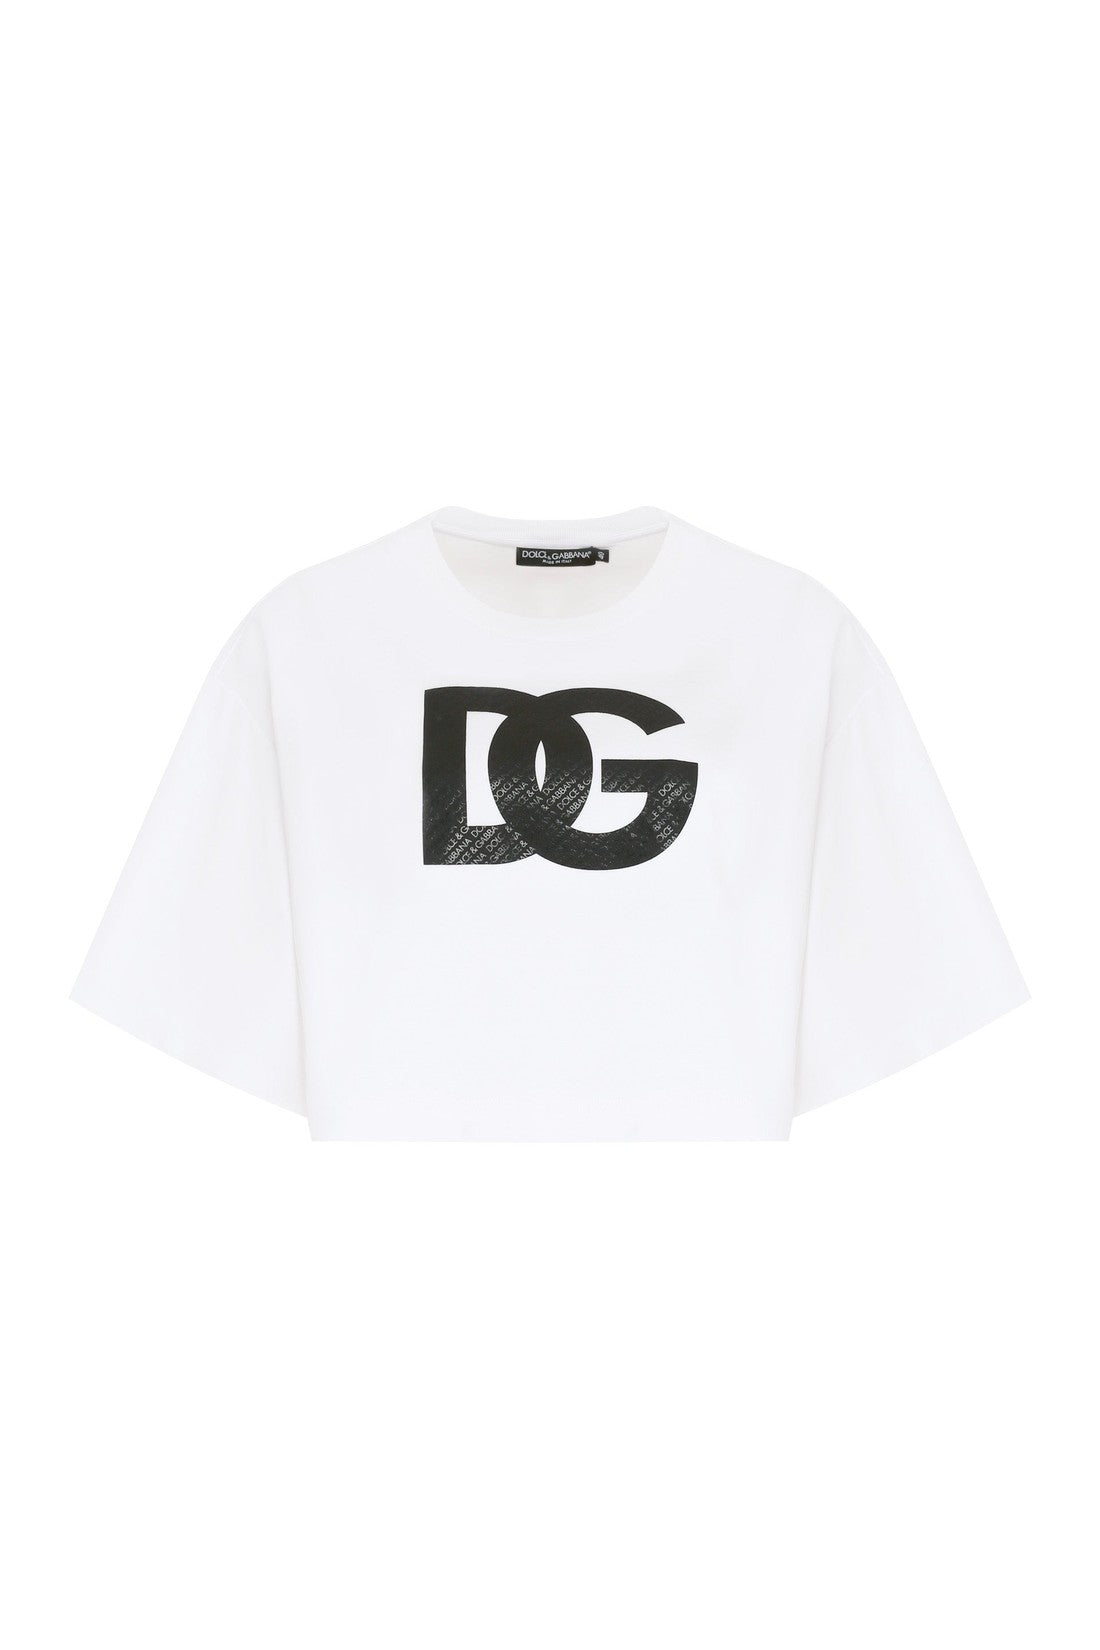 Dolce & Gabbana-OUTLET-SALE-Knitted crop top-ARCHIVIST